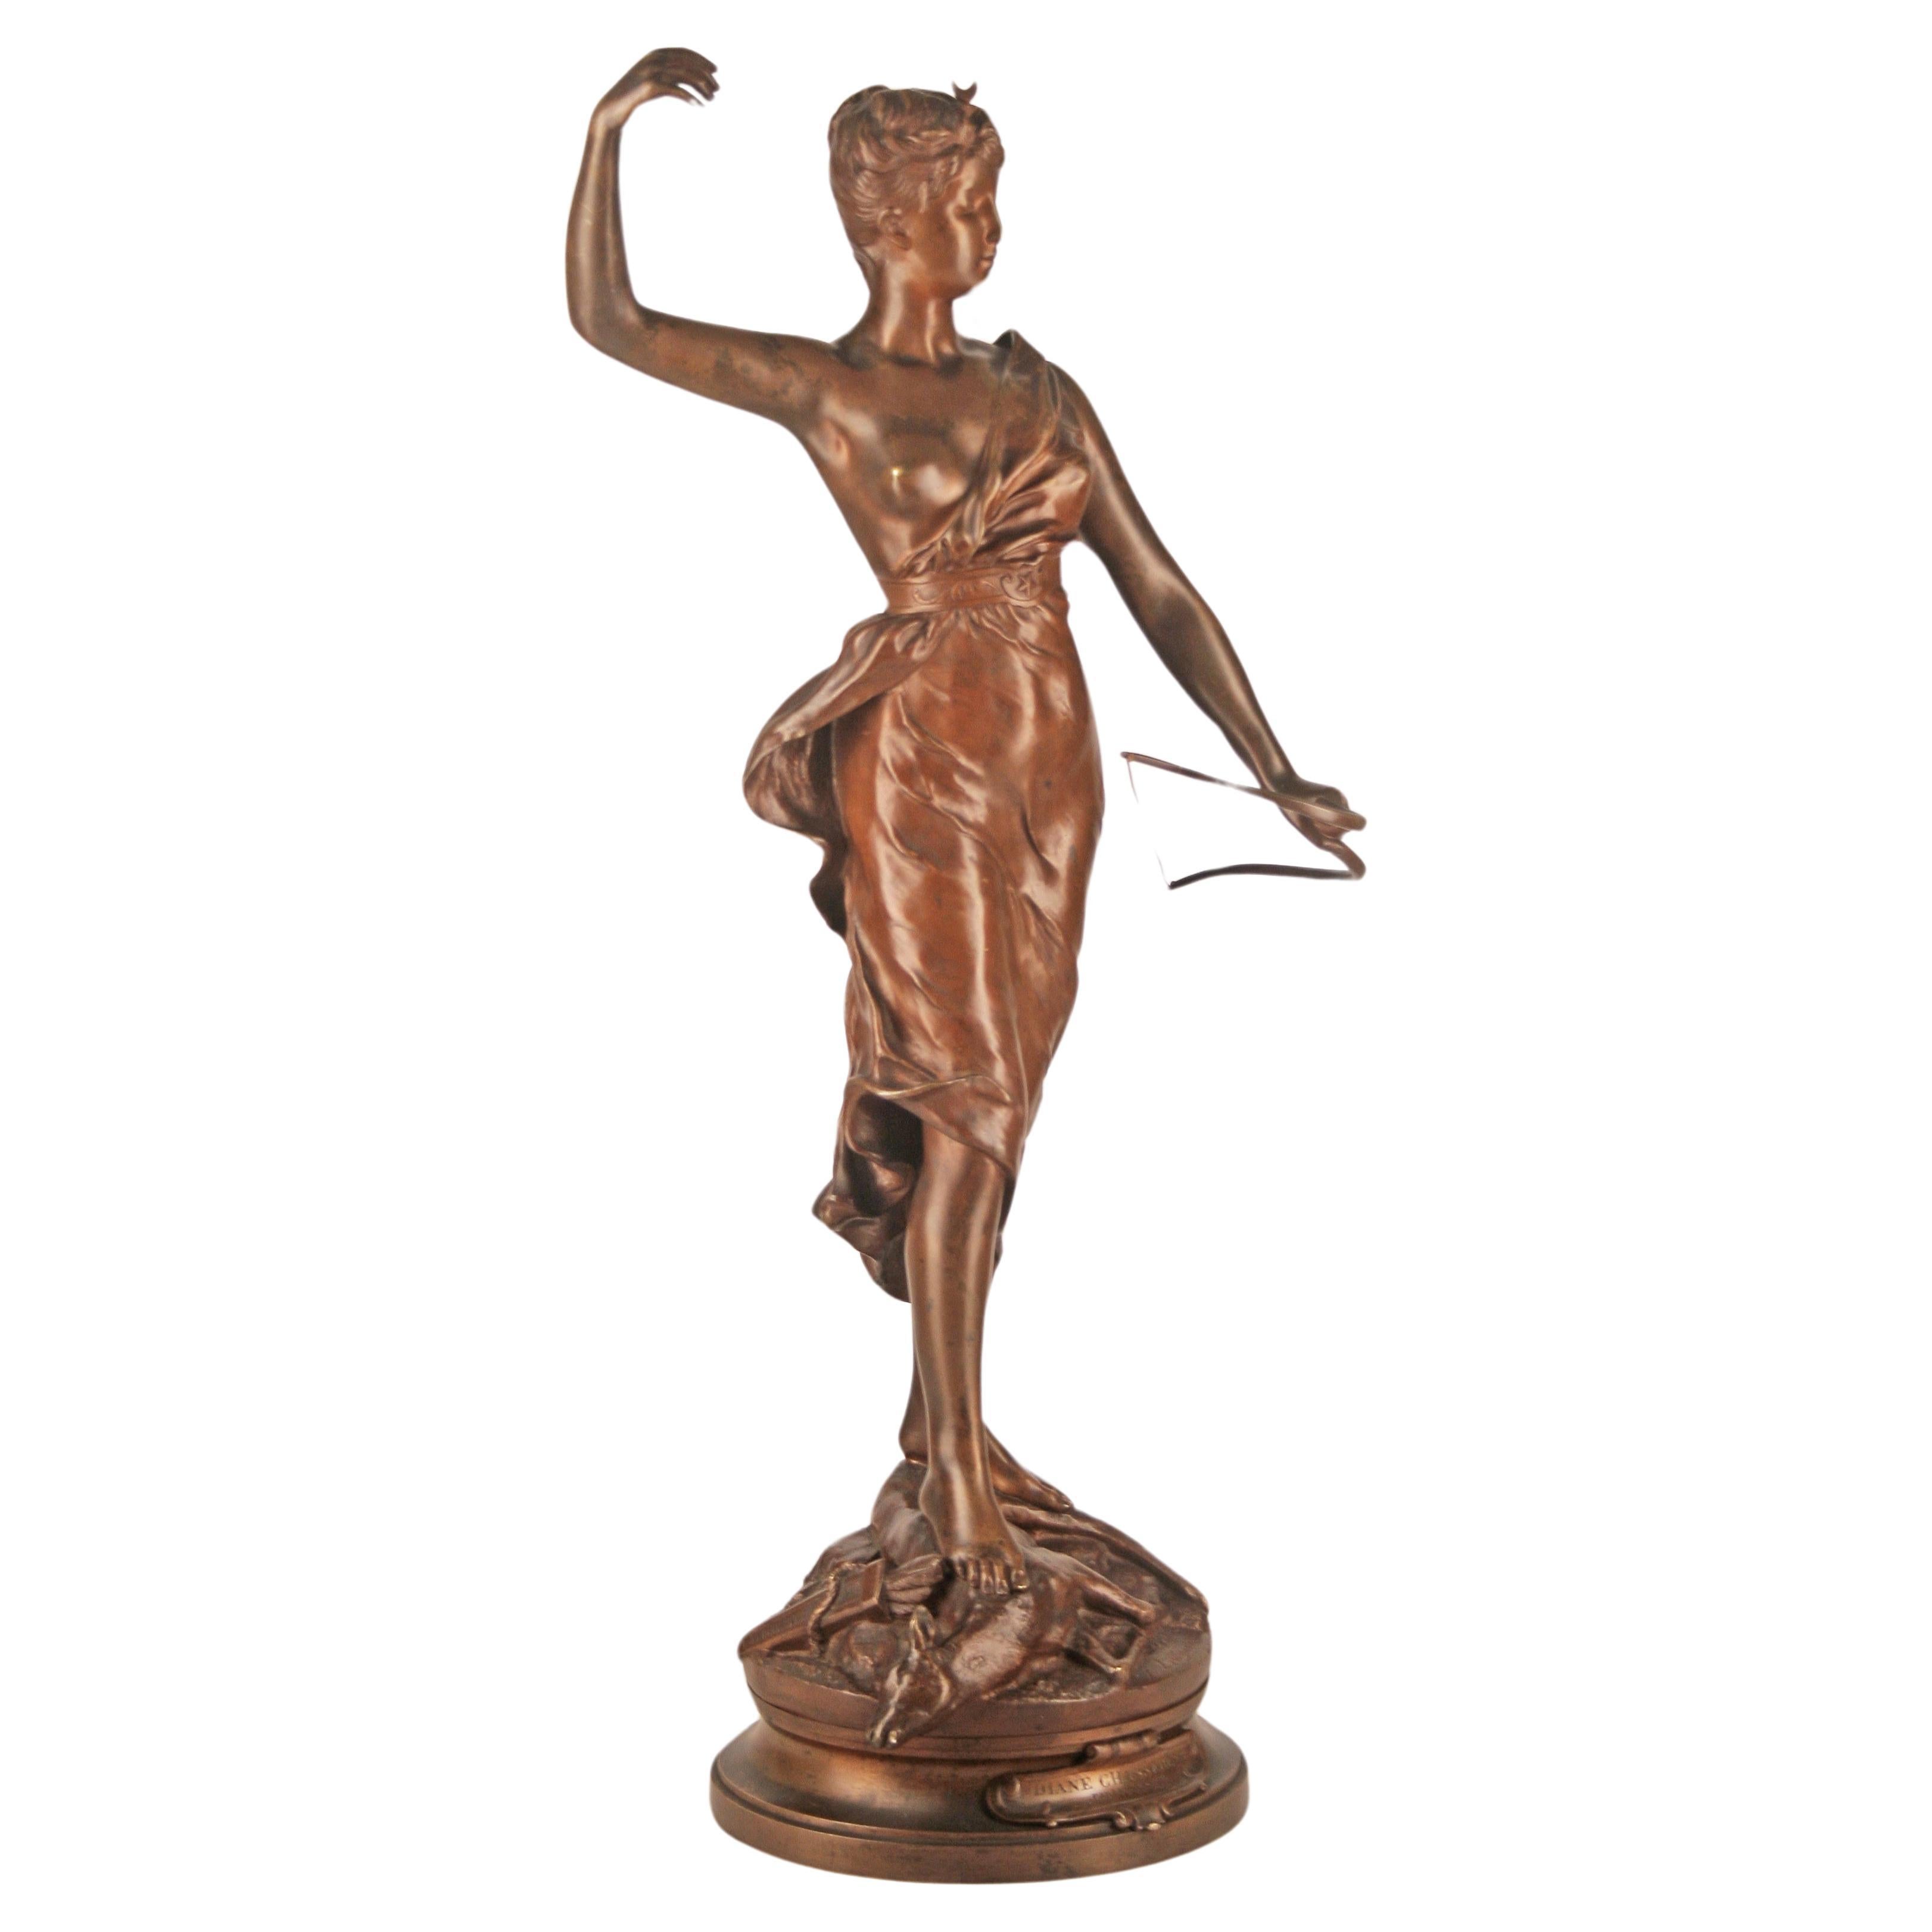 Bronze sculpture Diana the huntress
Classic bronze sculpture
Origin France Circa 1890
Excellent condition, some natural wear on the patina.
Artist A. Levasseur (out of competition)
Reason: Diana a hunter with a bow, arrow and a prey at her feet
Work